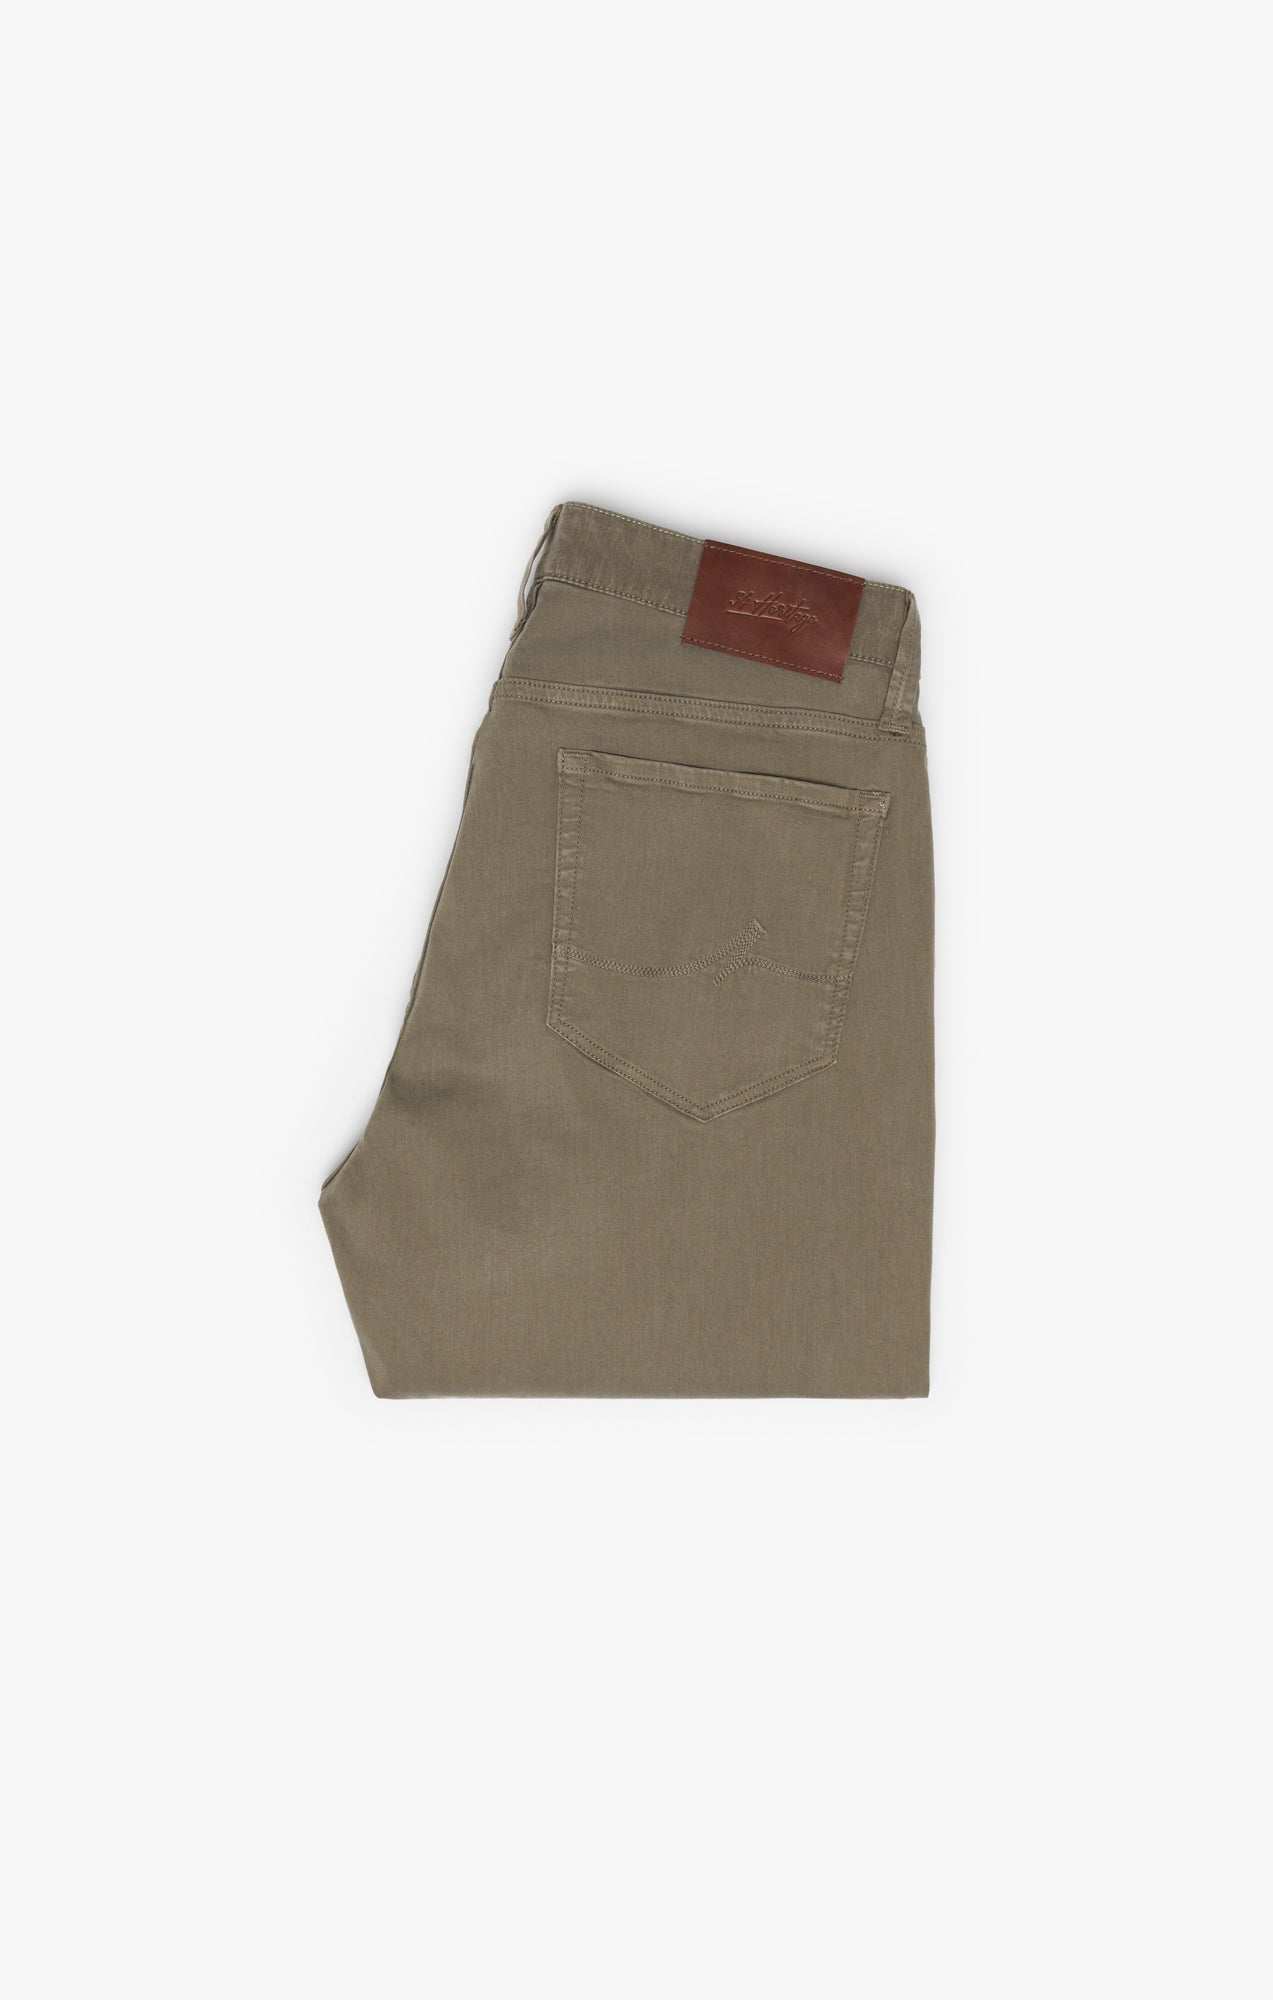 Charisma Relaxed Straight Leg Pants Canteen Twill Image 8